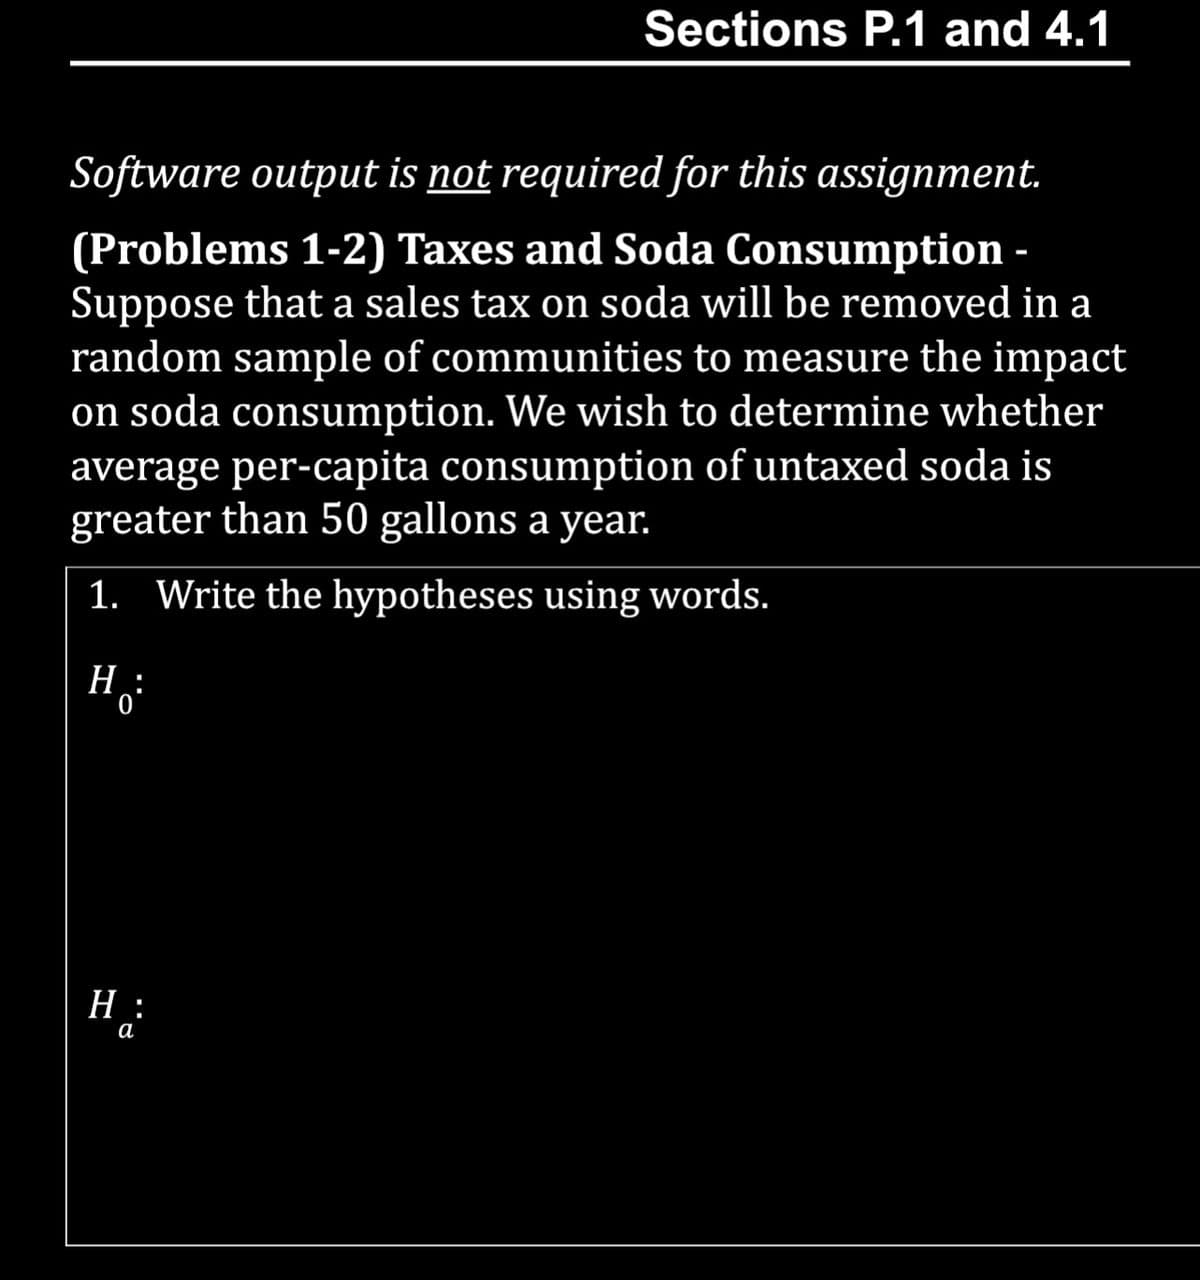 Sections P.1 and 4.1
Software output is not required for this assignment.
(Problems 1-2) Taxes and Soda Consumption -
Suppose that a sales tax on soda will be removed in a
random sample of communities to measure the impact
on soda consumption. We wish to determine whether
average per-capita consumption of untaxed soda is
greater than 50 gallons a year.
1. Write the hypotheses using words.
H:
H:
a